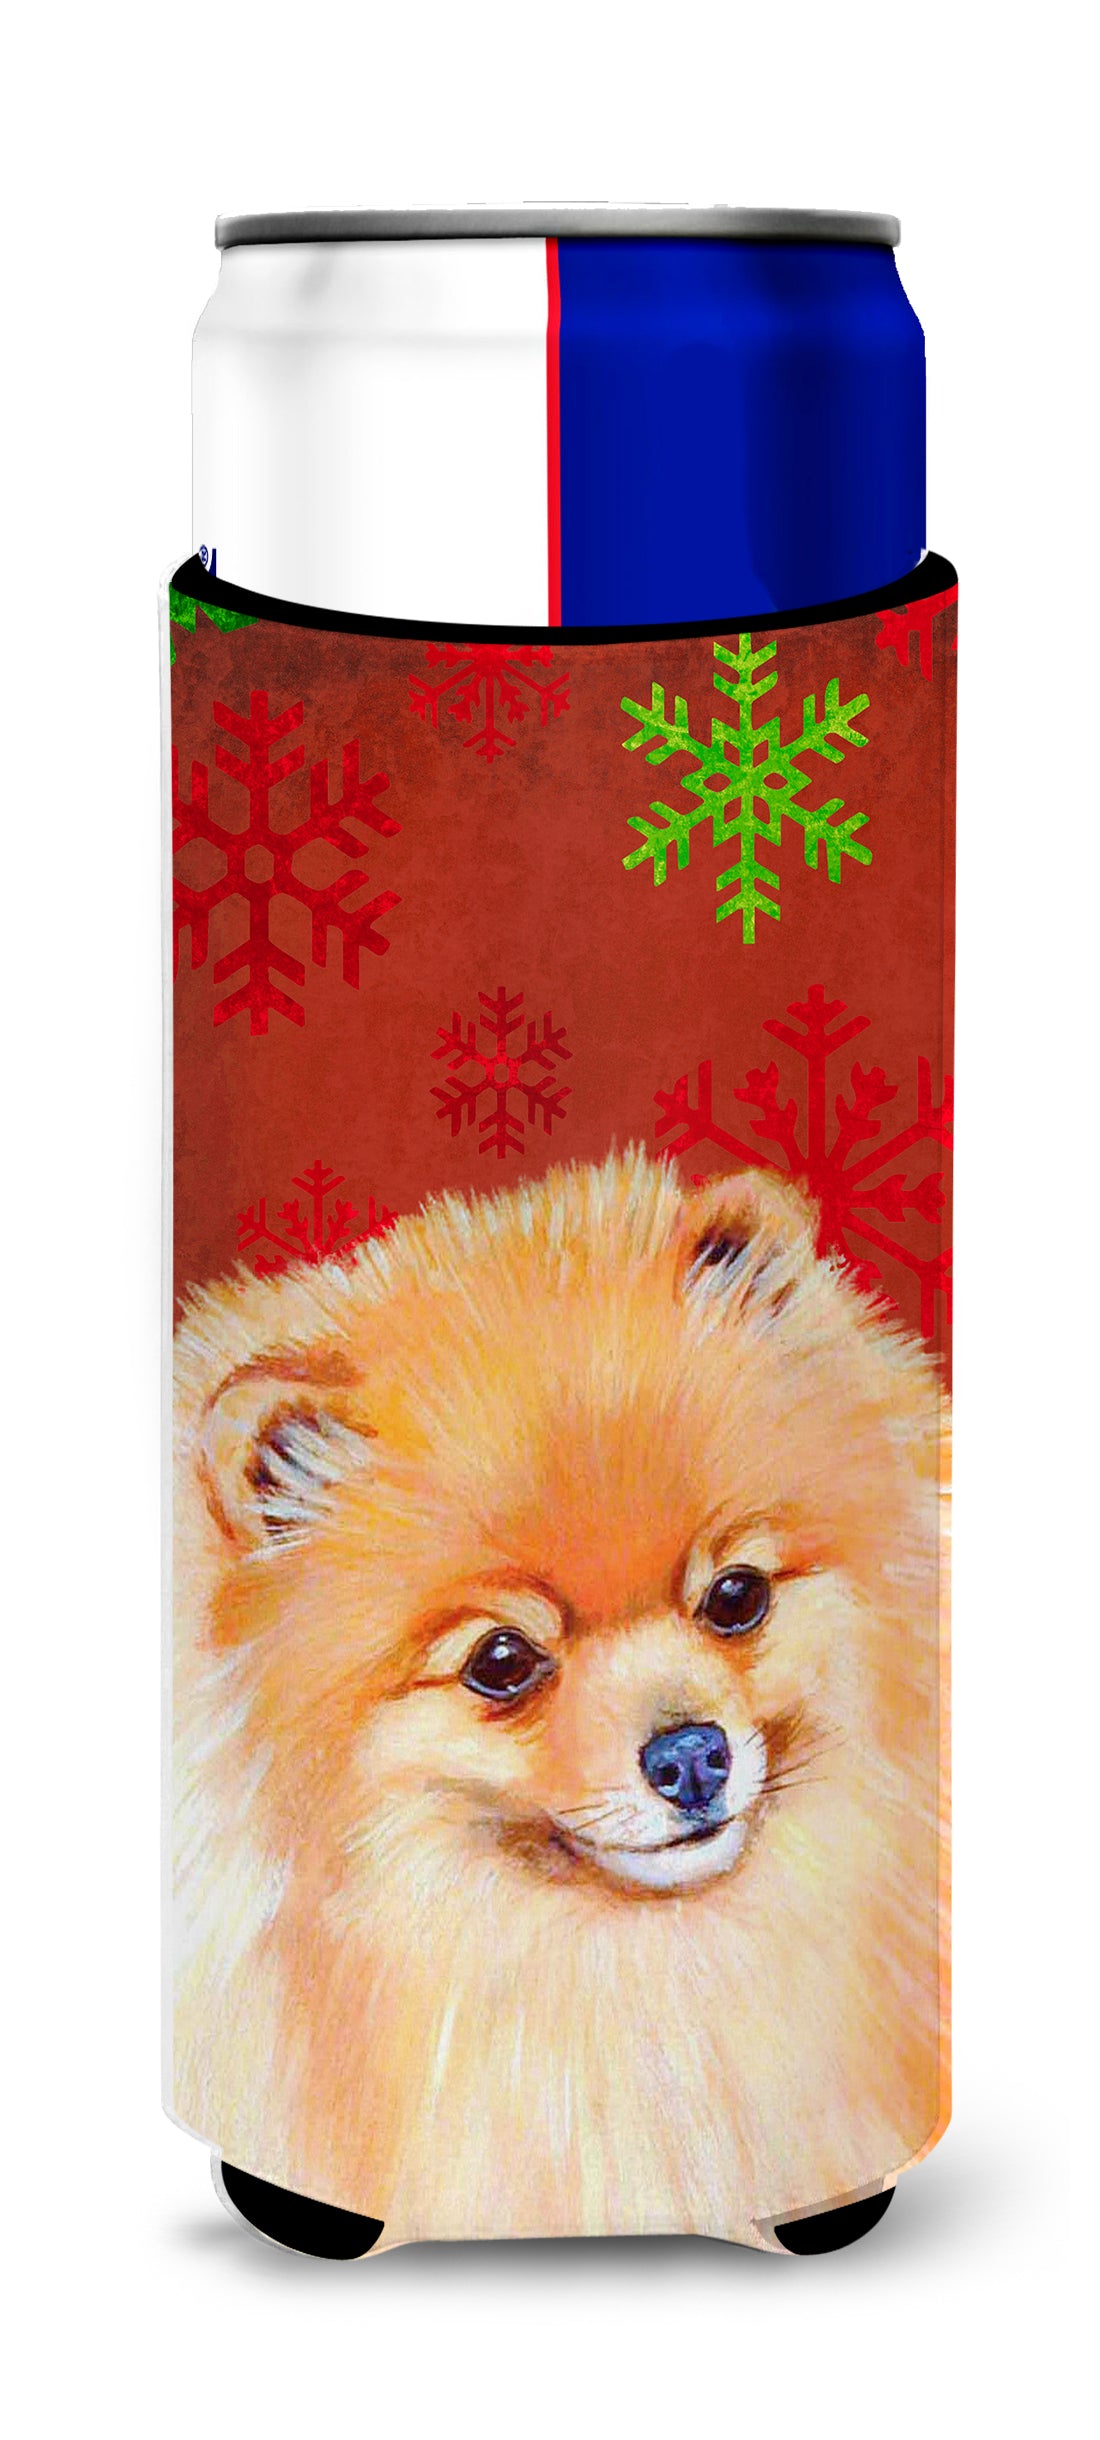 Pomeranian Red and Green Snowflakes Holiday Christmas Ultra Beverage Insulators for slim cans LH9350MUK.